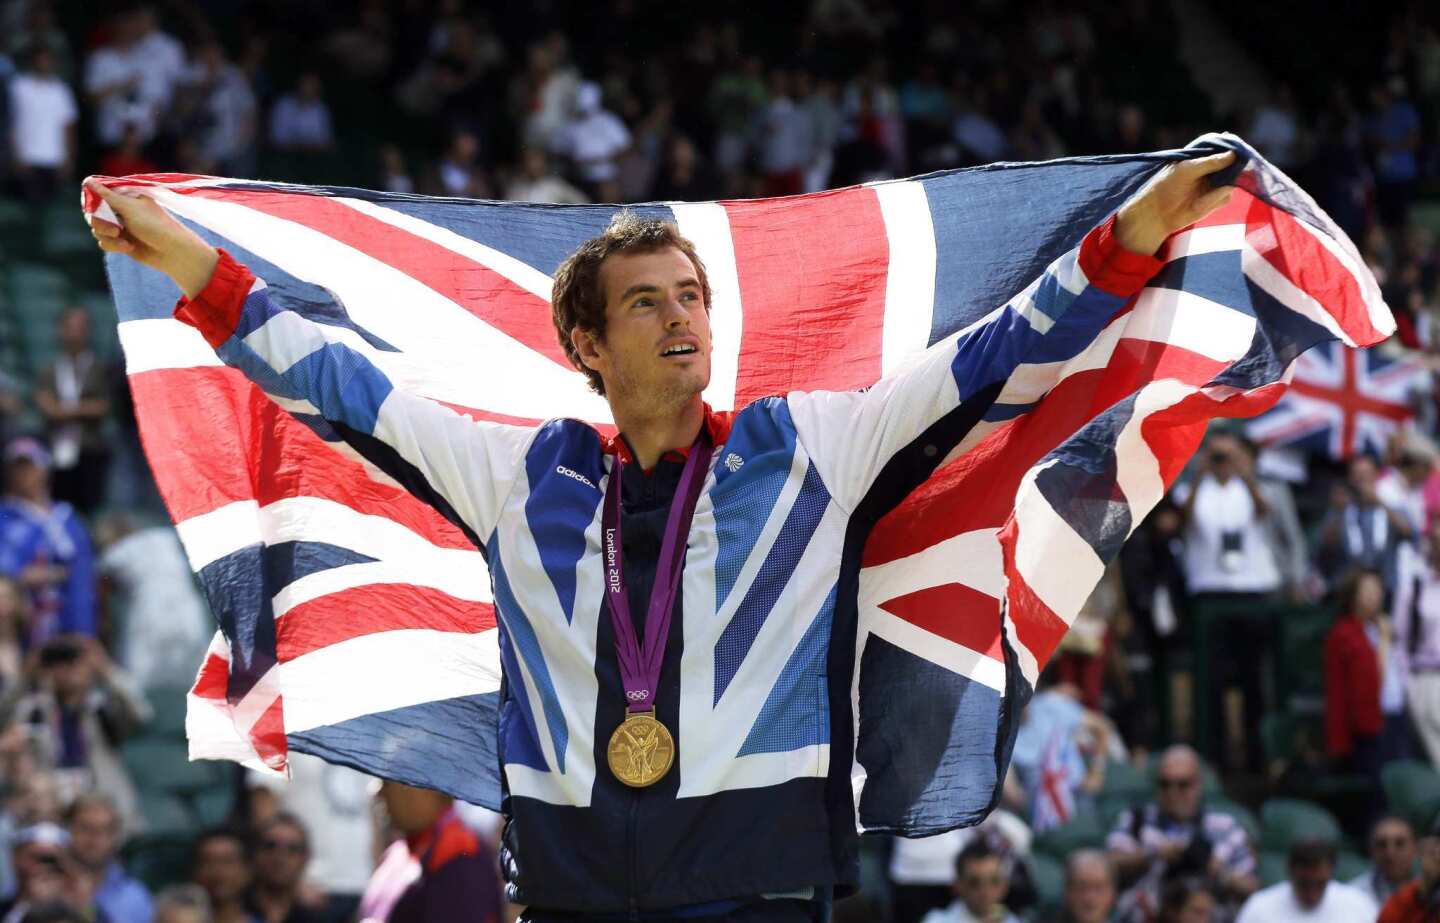 Gold-medalist Andy Murray waves the British flag during the medal ceremony after defeating Roger Federer in the men's tennis singles final on Sunday at the All England Lawn Tennis Club at Wimbledon.